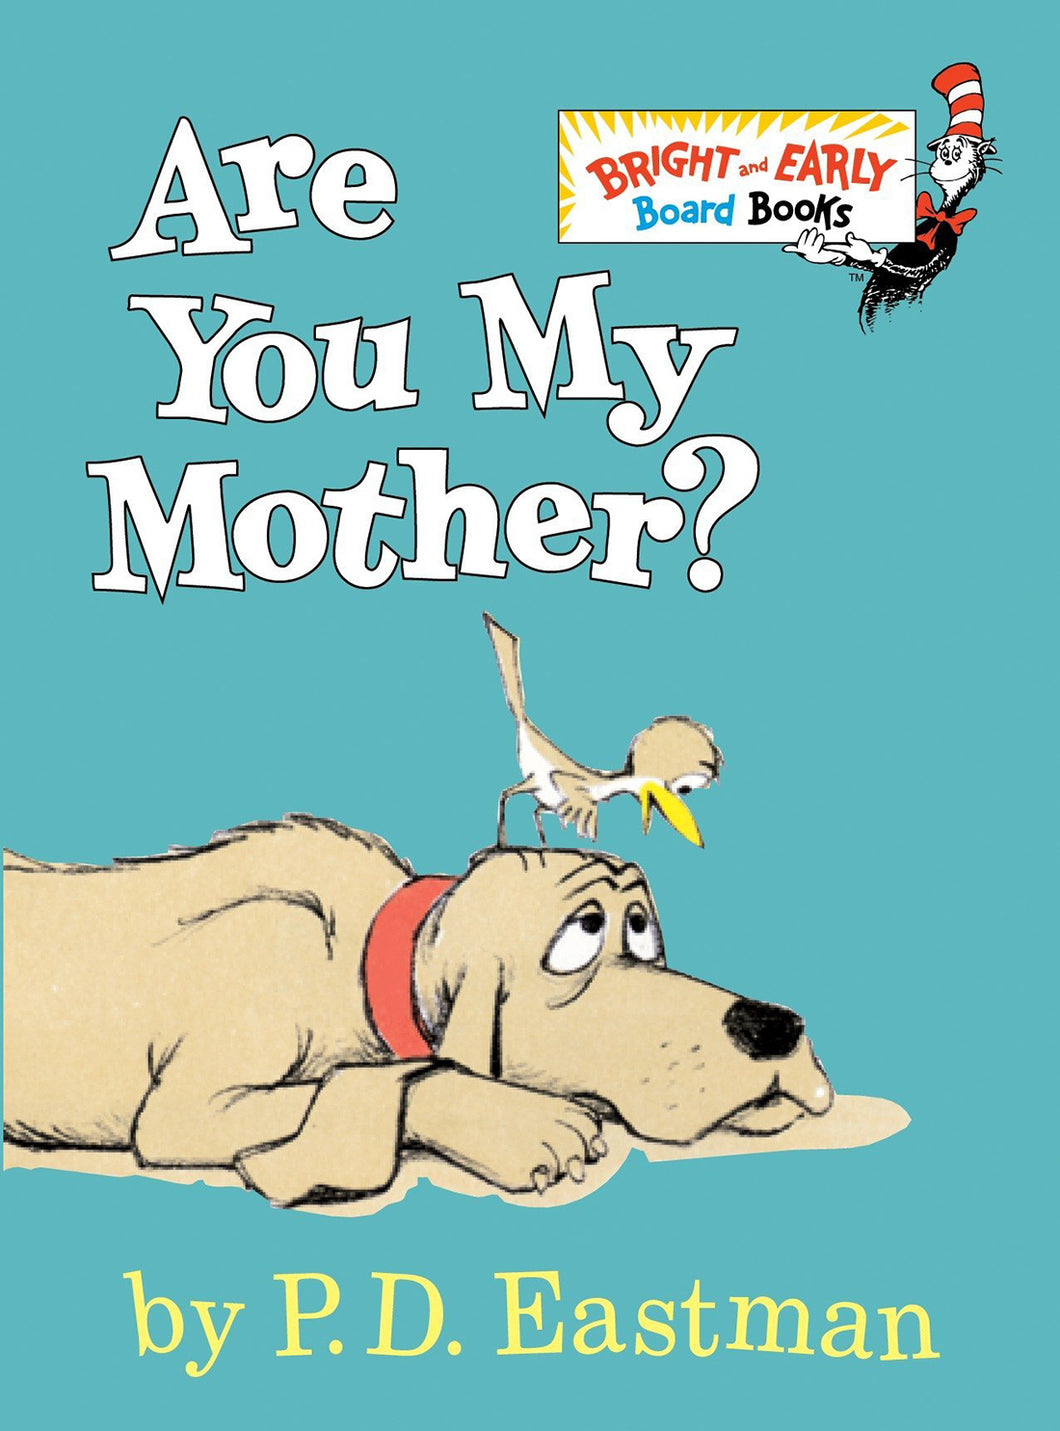 Are You My Mother? by P. D. Eastman / Board Book - NEW BOOK (English or Spanish)